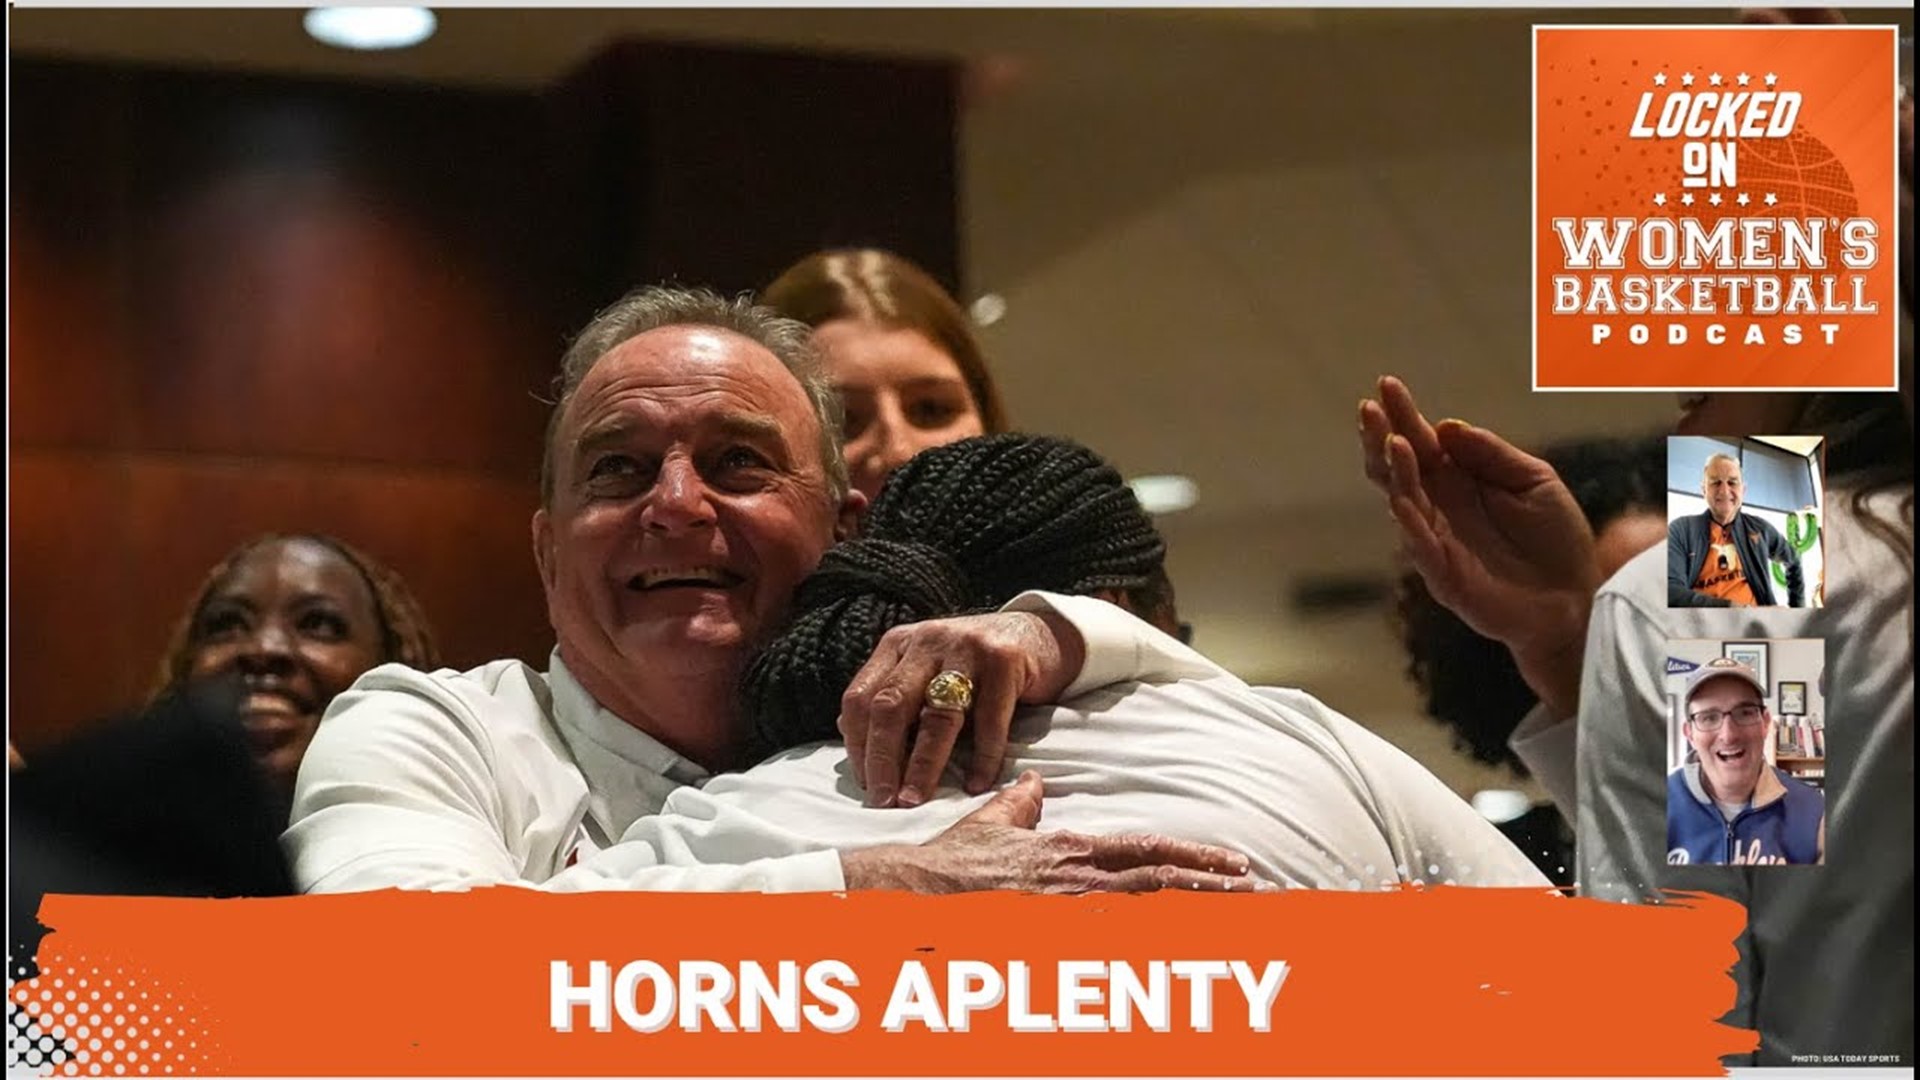 When all-world point guard Rori Harmon was lost for the season due to injury, few gave Vic Schaefer's Texas Longhorns a chance to contend for a national title.